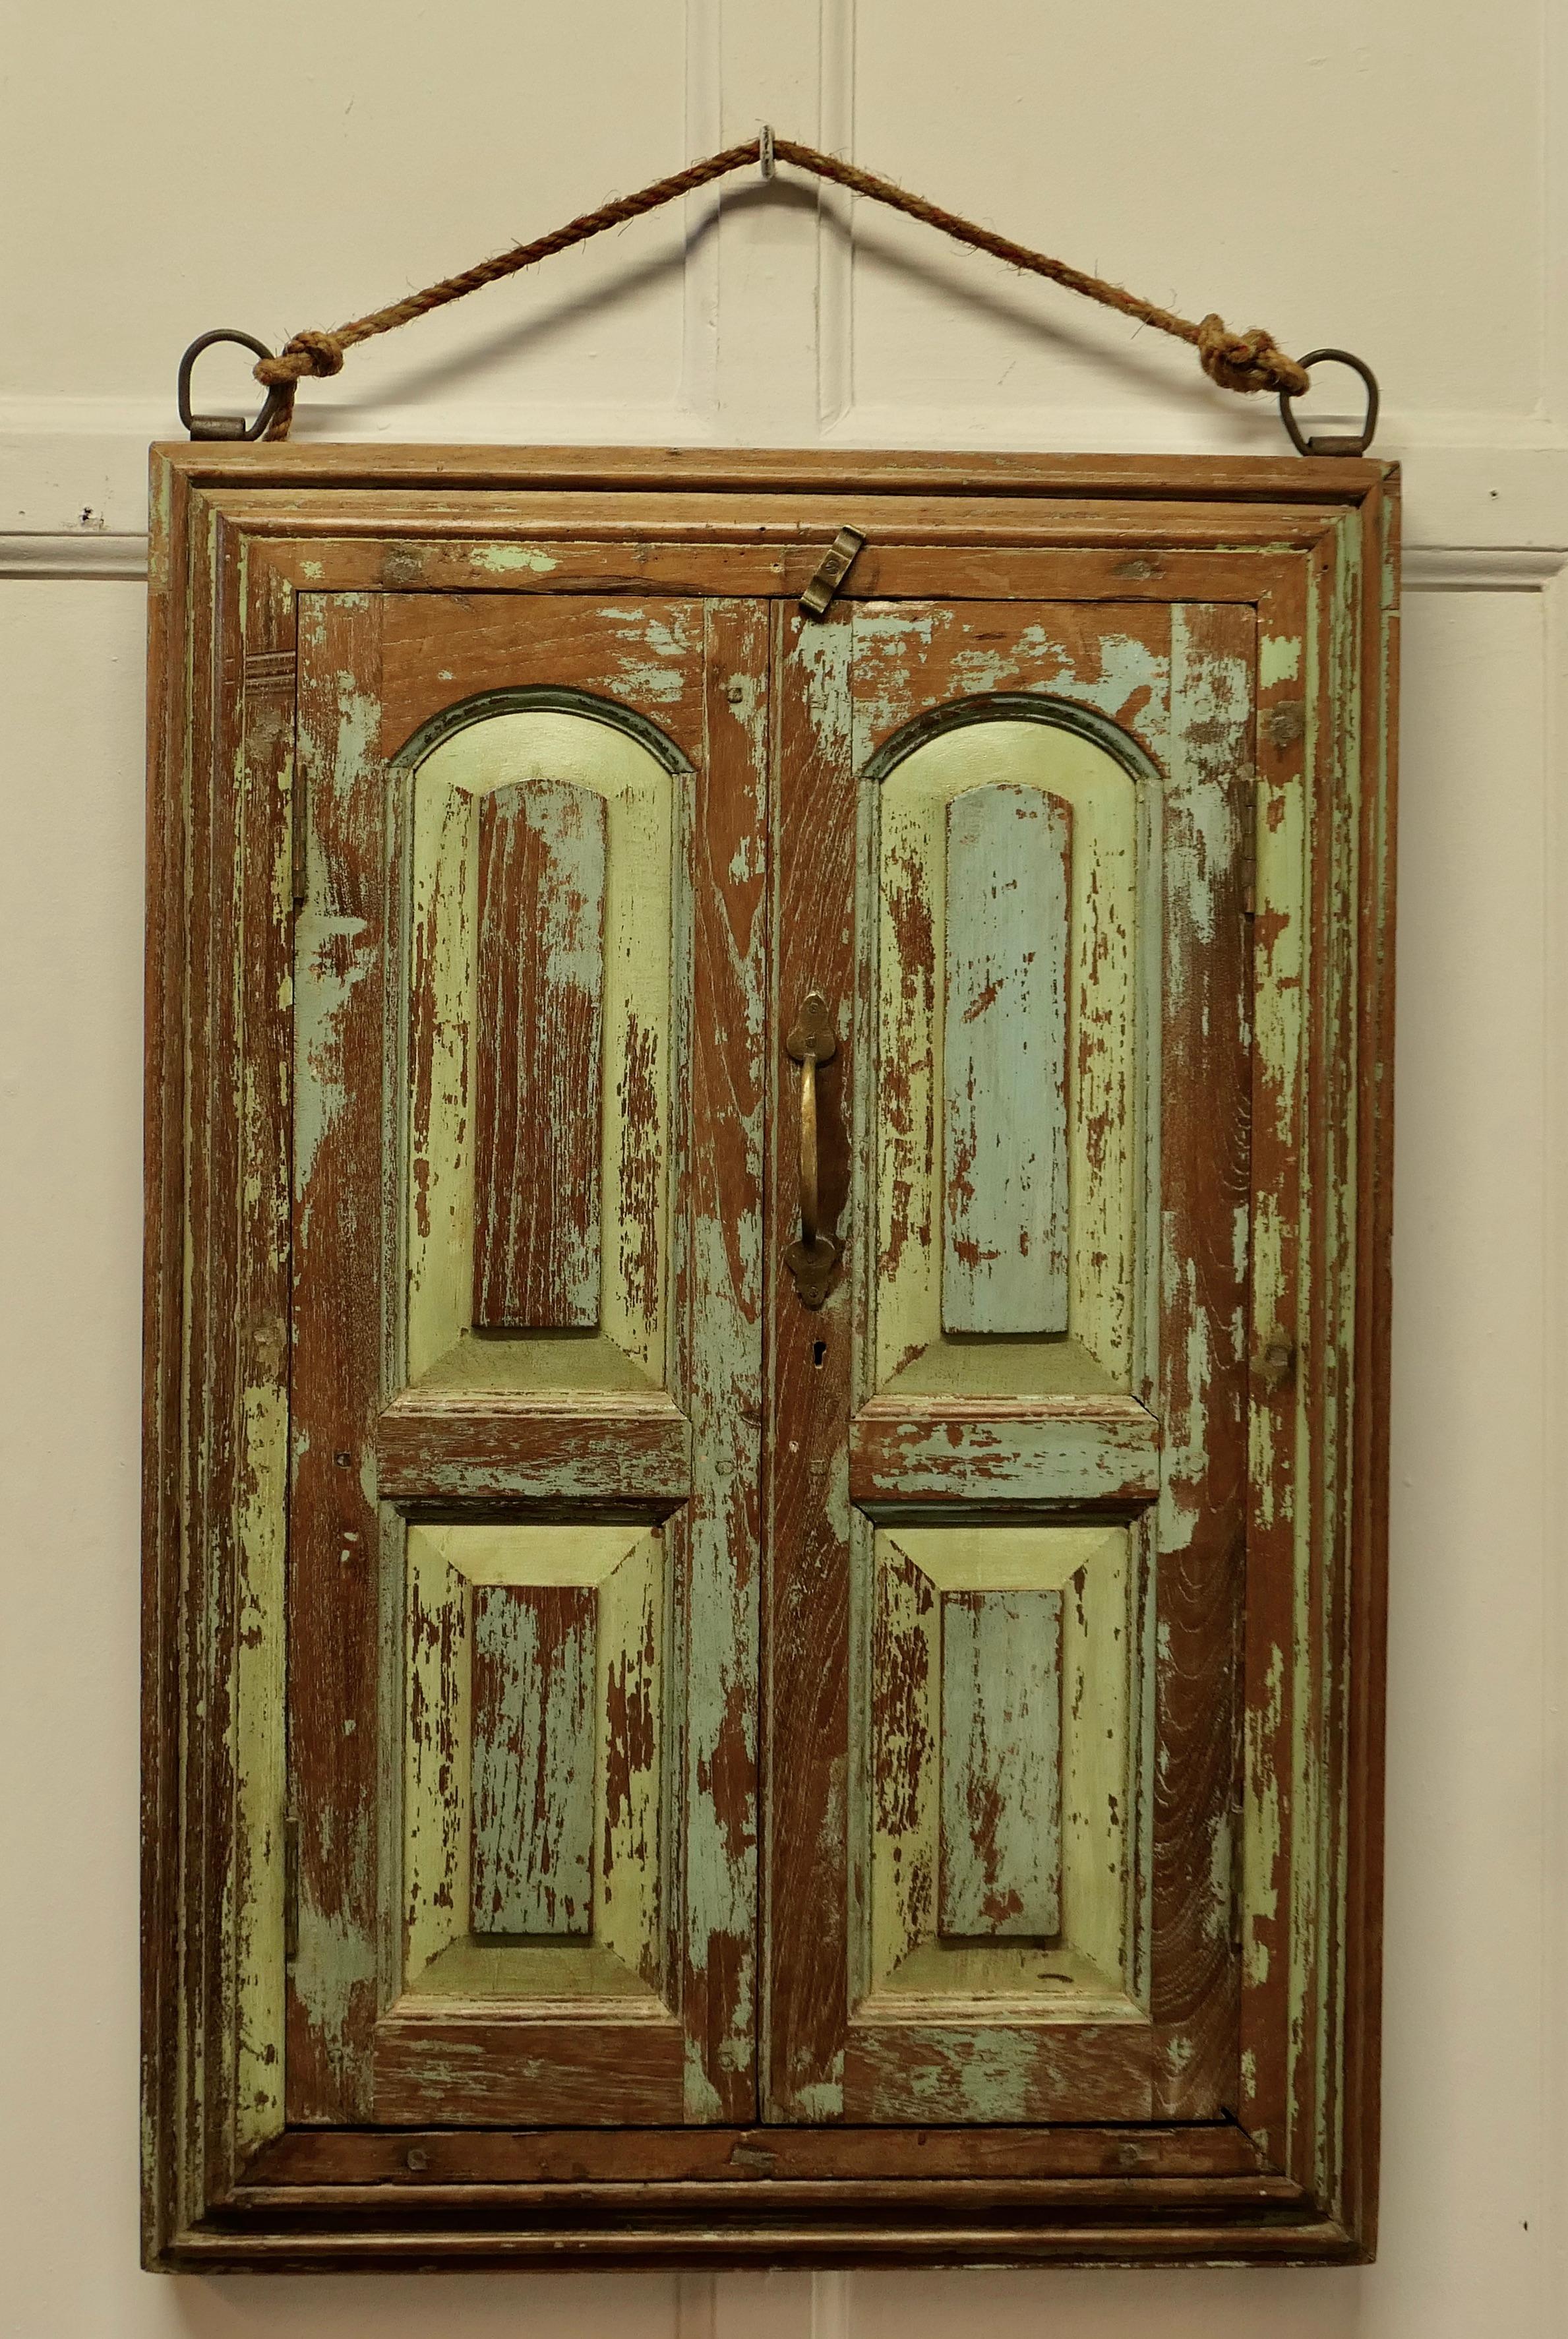 Wall Mirror Concealed by Heavy Oak Door Frame/Shutters

This very attractive Panelled Oak Double Door Frame conceals a mirror
The pair of doors have their original metal hinges and wooden closer, they were once painted in a pale blue now mostly worn